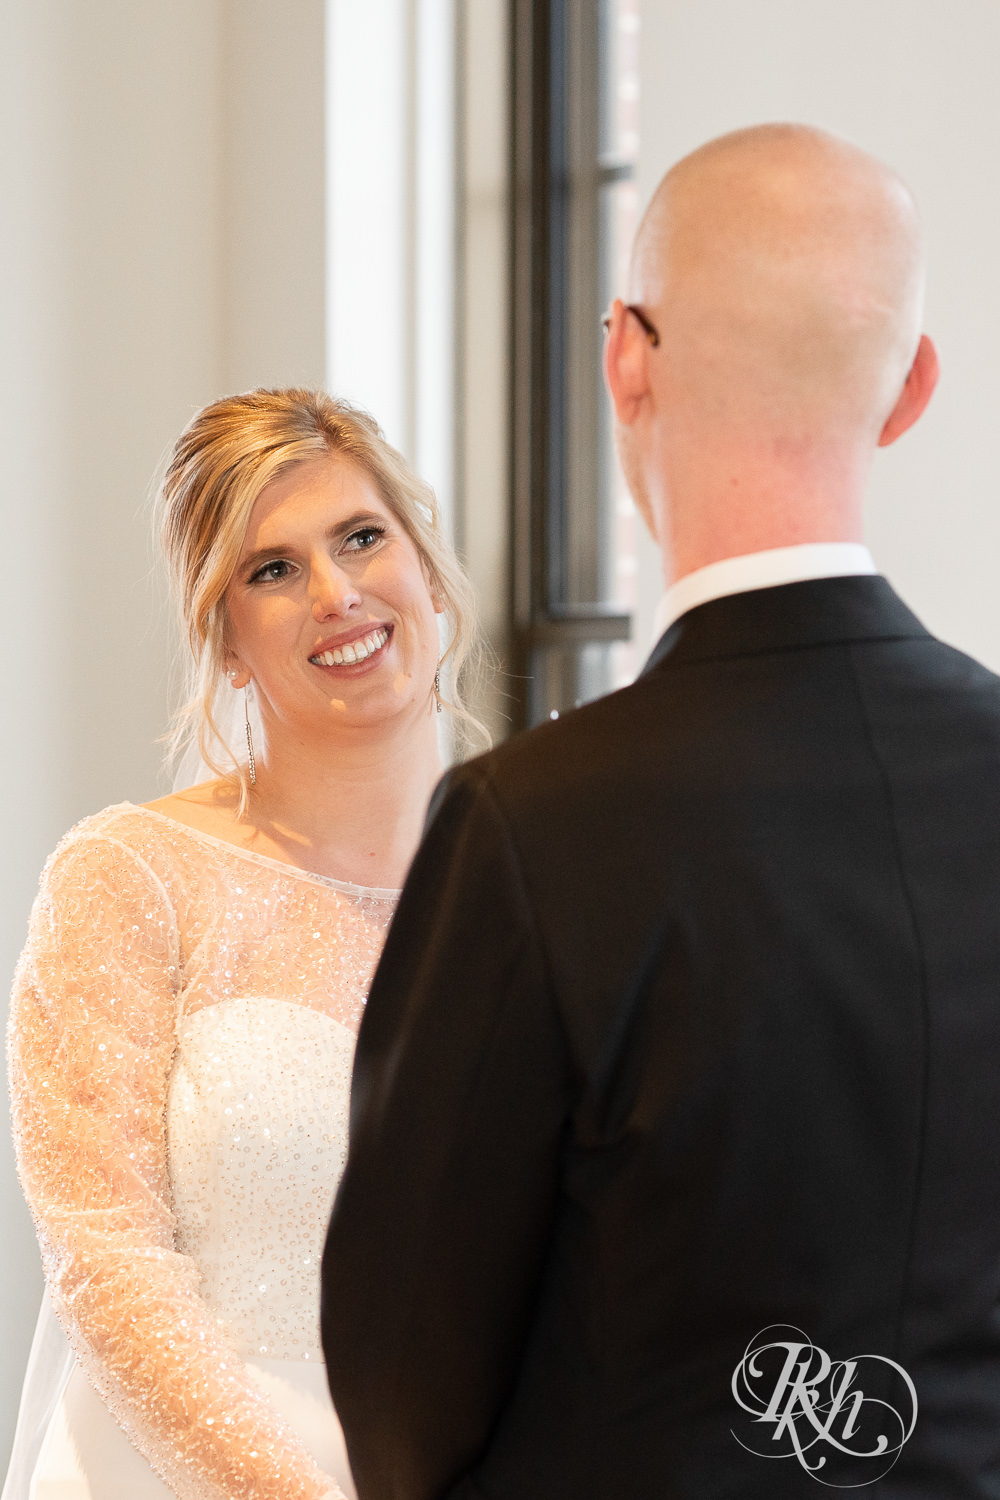 Bride and groom smile during indoor wedding ceremony at Gatherings at Station 10 in Saint Paul, Minnesota.